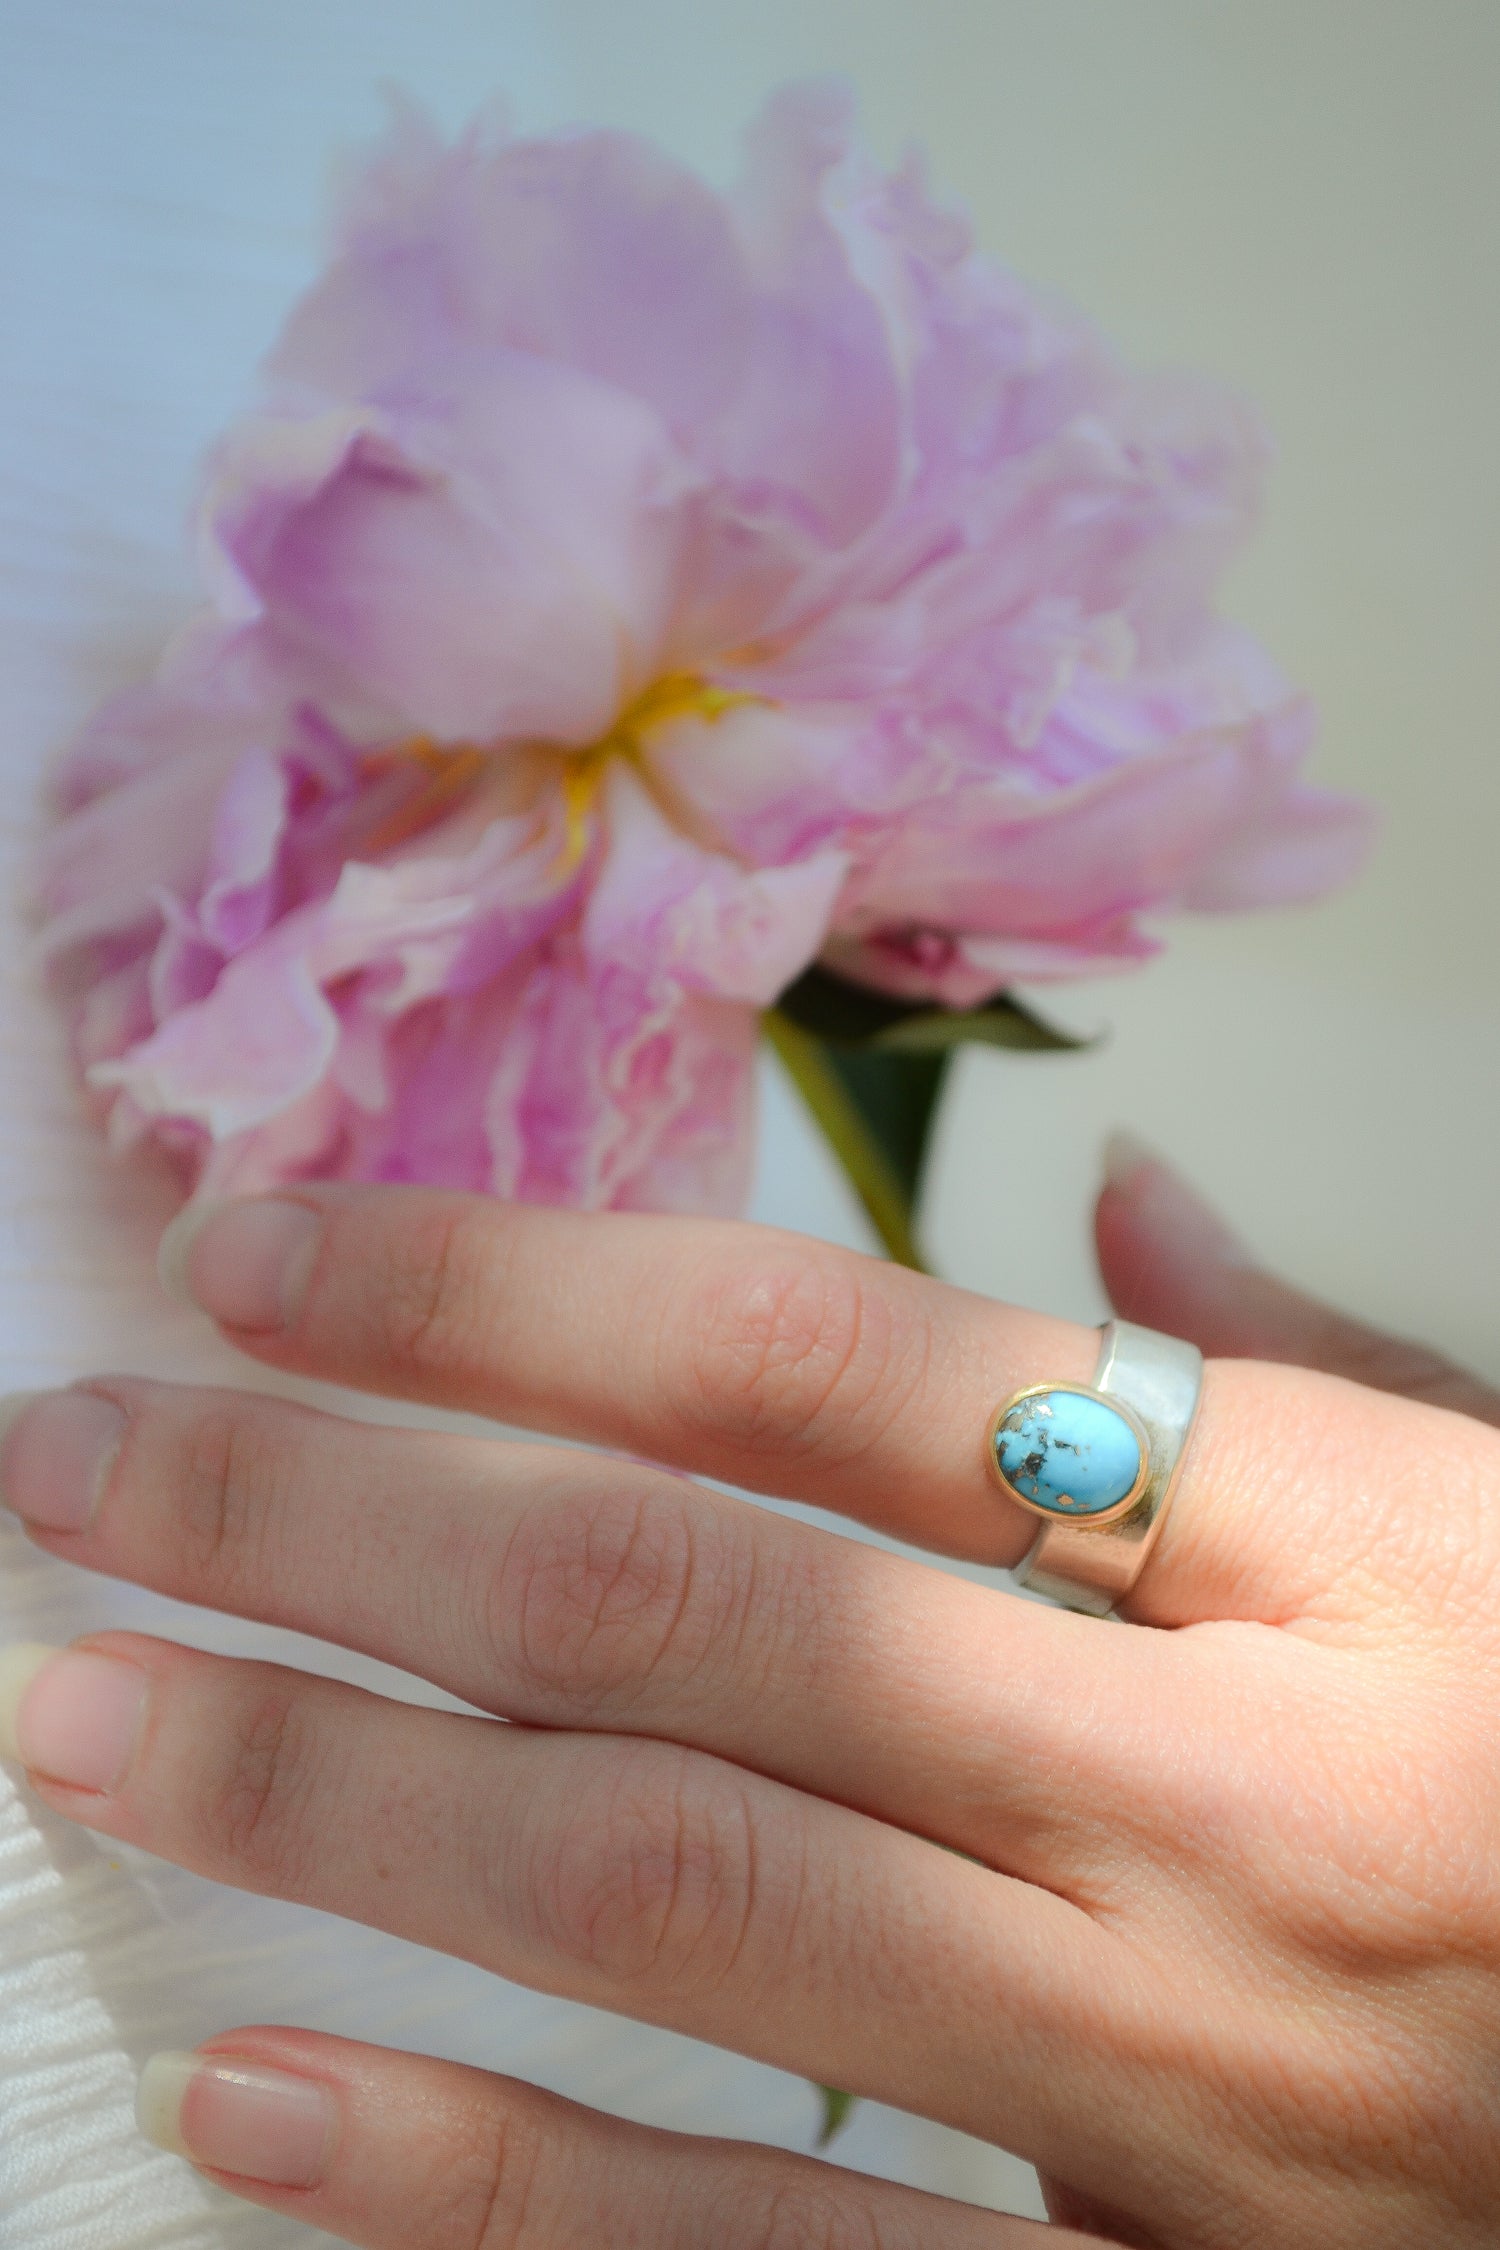 Made by hand in Northern New Mexico using recycled metals and responsibly sourced stones. This ring features a large cabochon Persian Turquoise stone set in a 14k yellow Gold bezel on a wide Sterling Silver band with matte finish. Mesa Ring by Halcyon Jewelry.